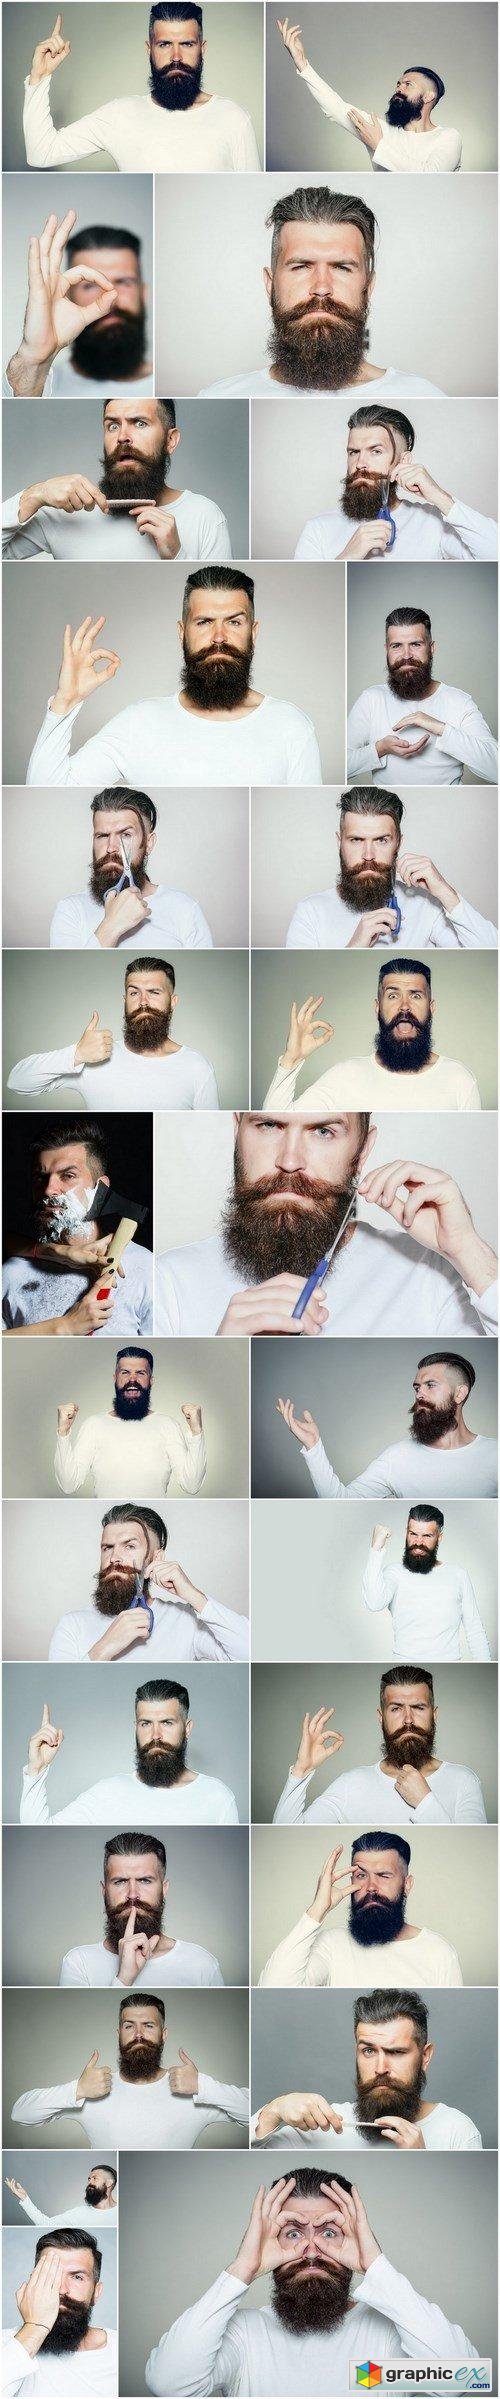 Man with Beard, Brutal Style, Hipster - 27xUHQ JPEG